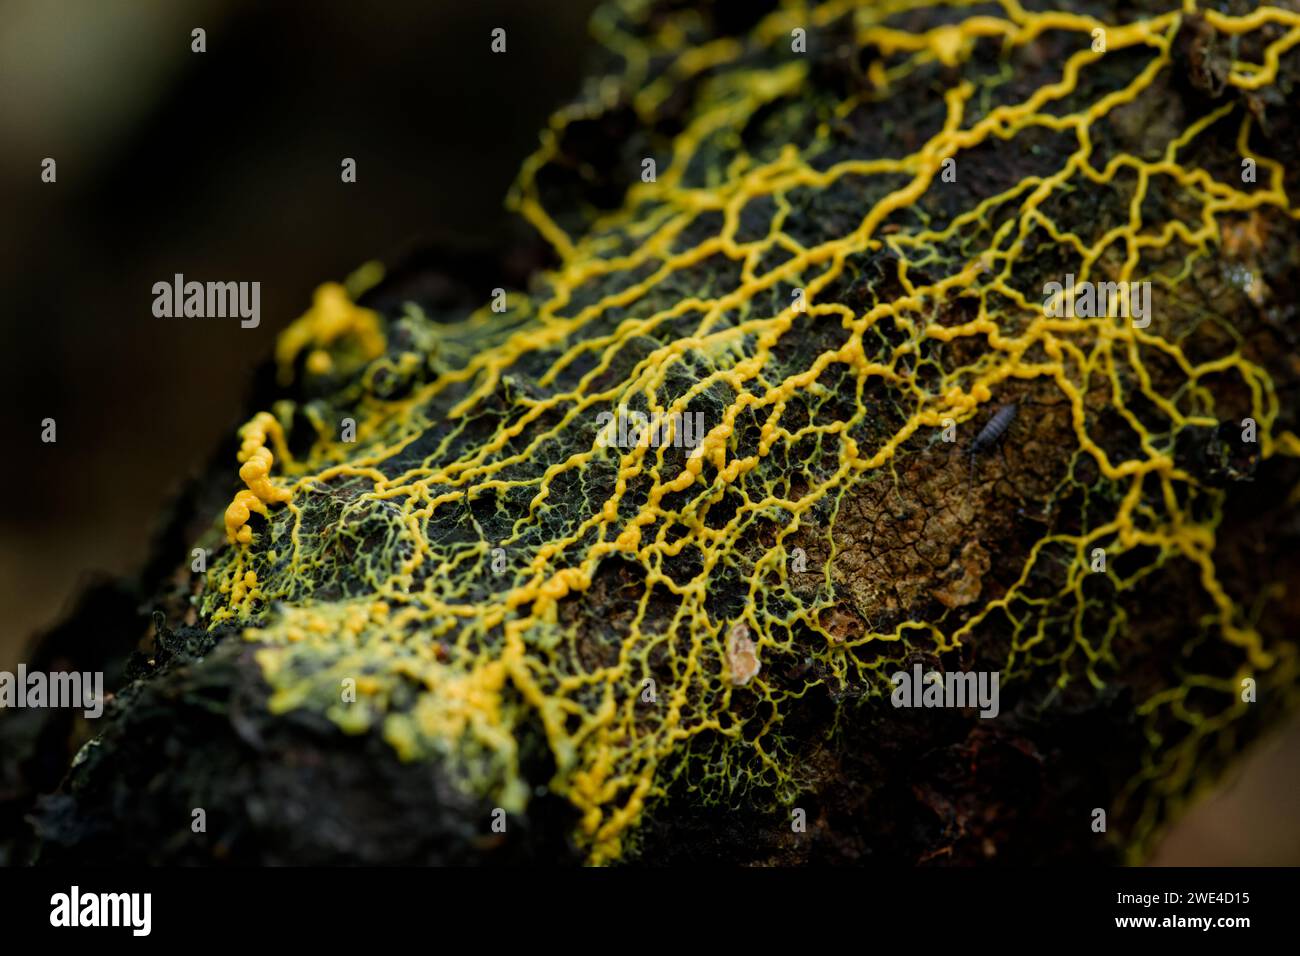 Yellow plasmodial slime mold on rotten wood Stock Photo